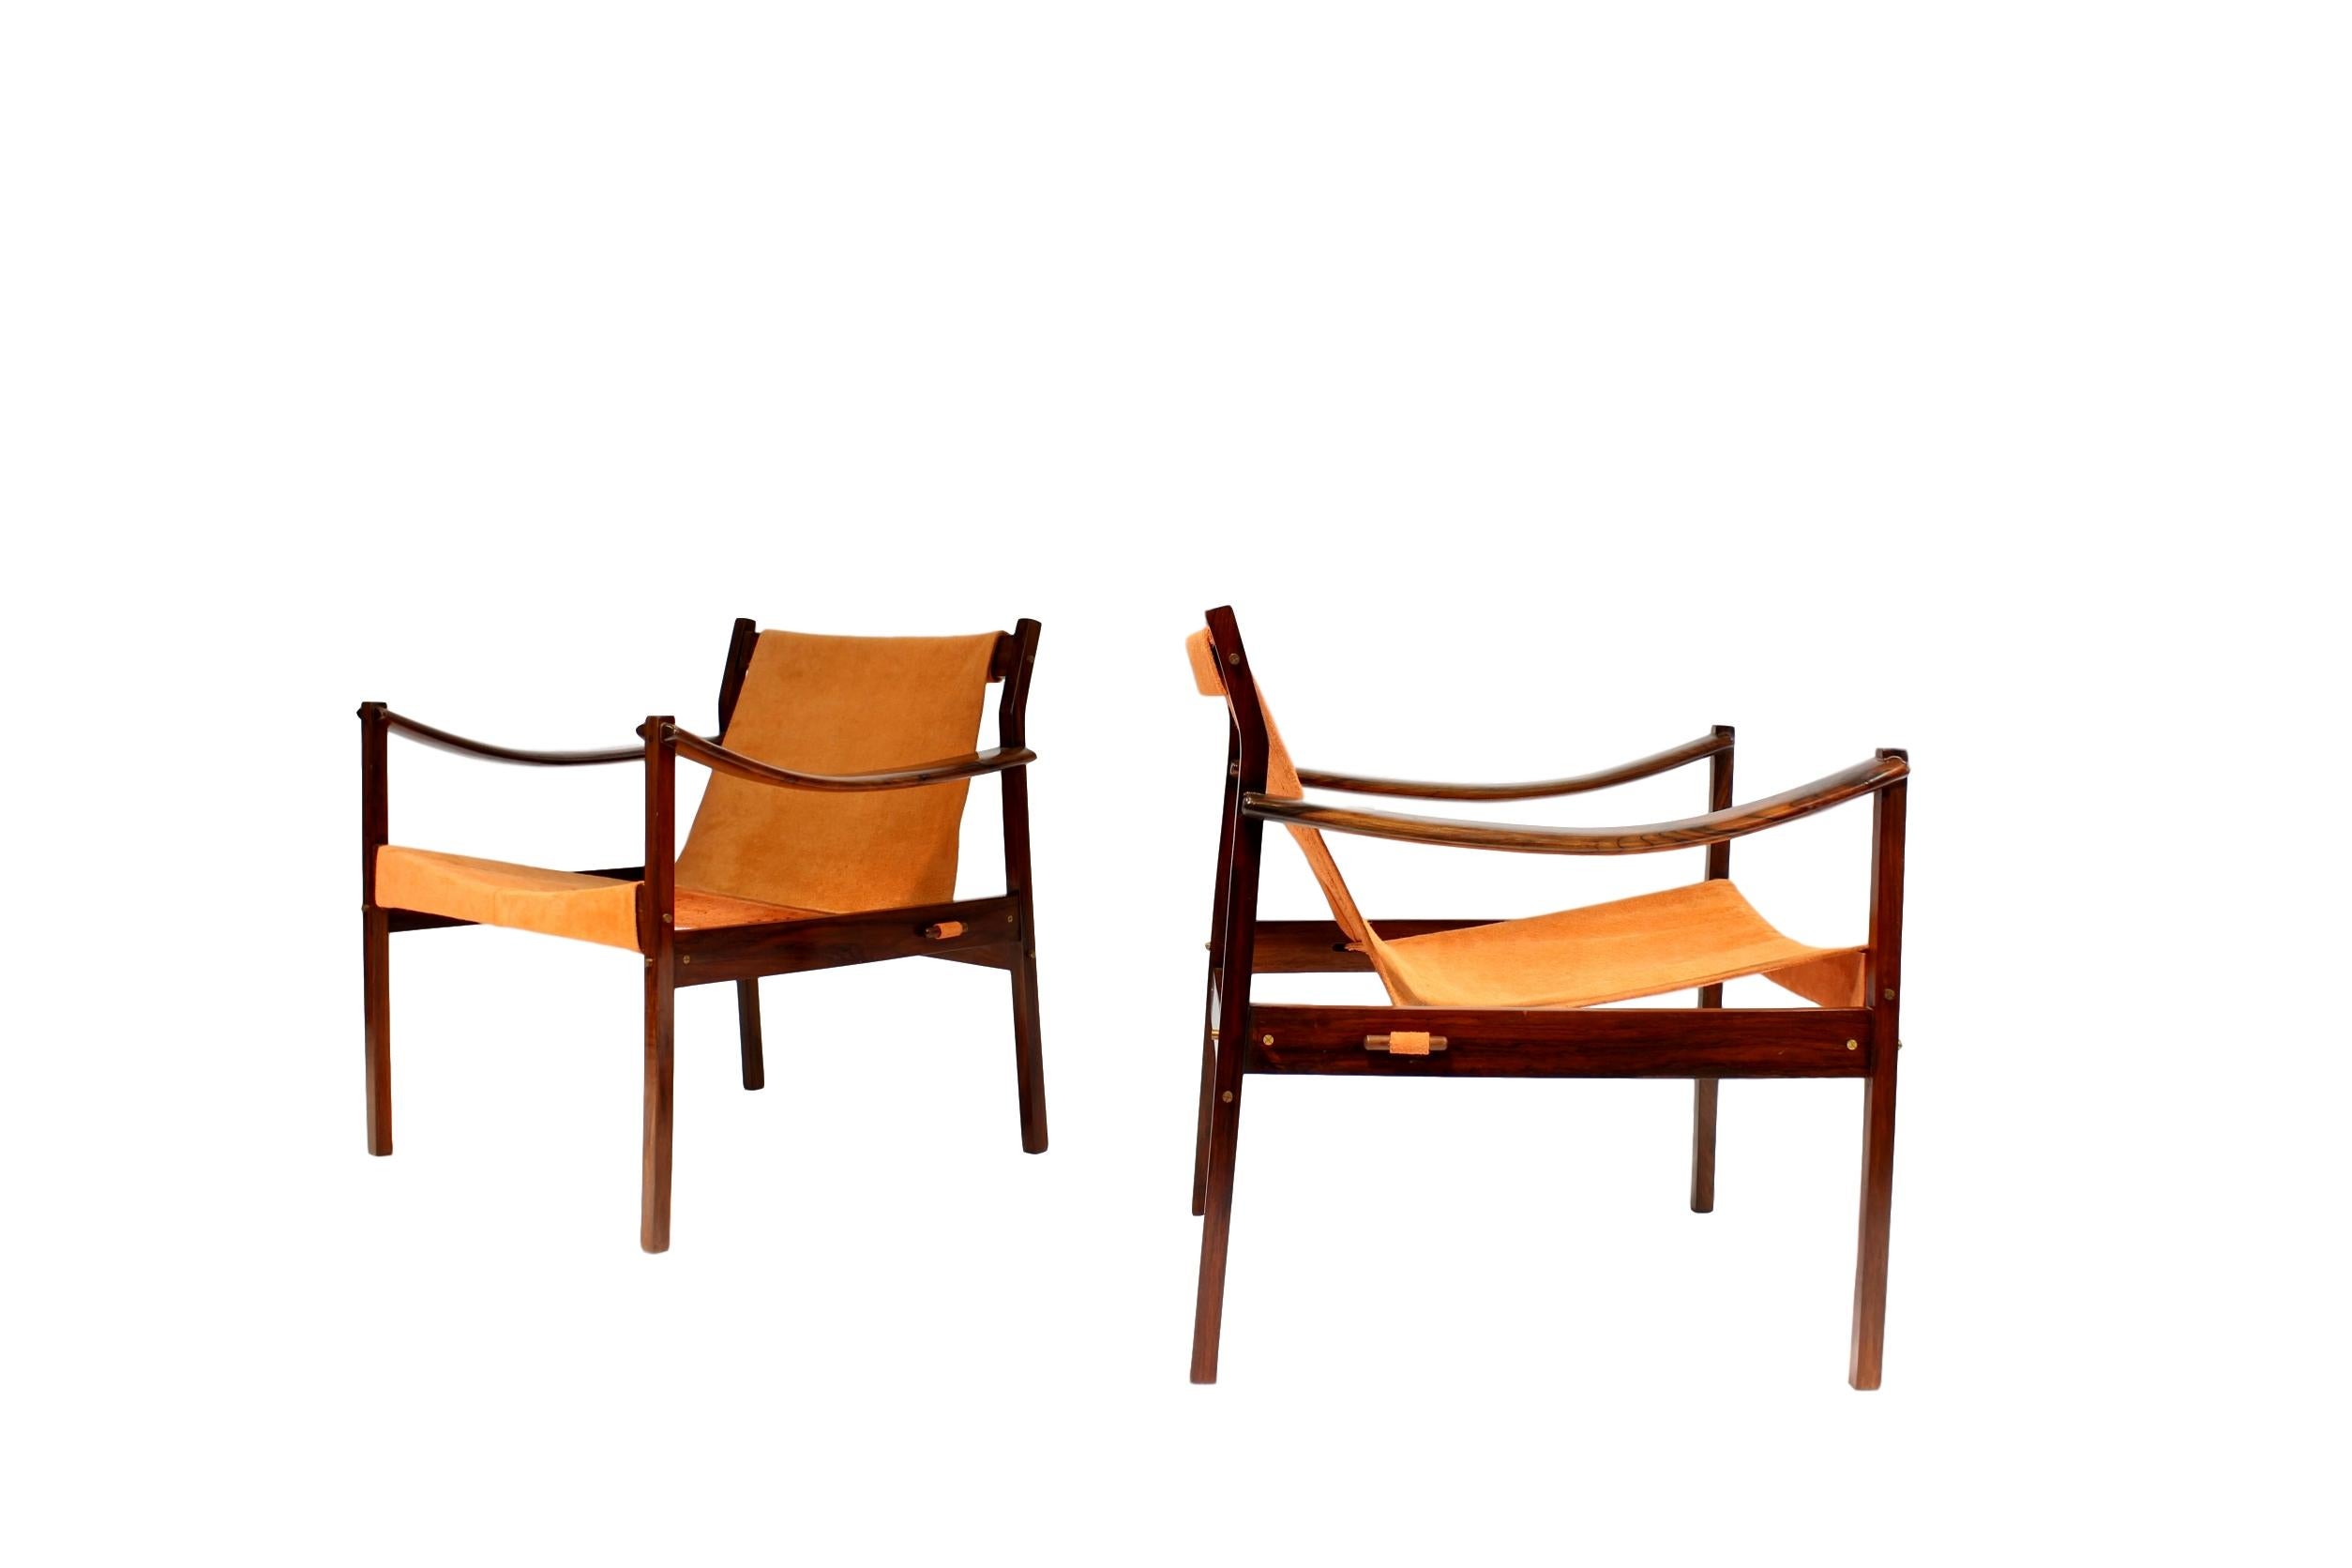 Set of two armchairs model 720, in rosewood and leather by Jorge Zalszupin for L'Atelier, Brazil, the 1960s. This scarce model has a very sensual design with a well-made rosewood frame. The wonderfully curved arms show outstanding craftsmanship and